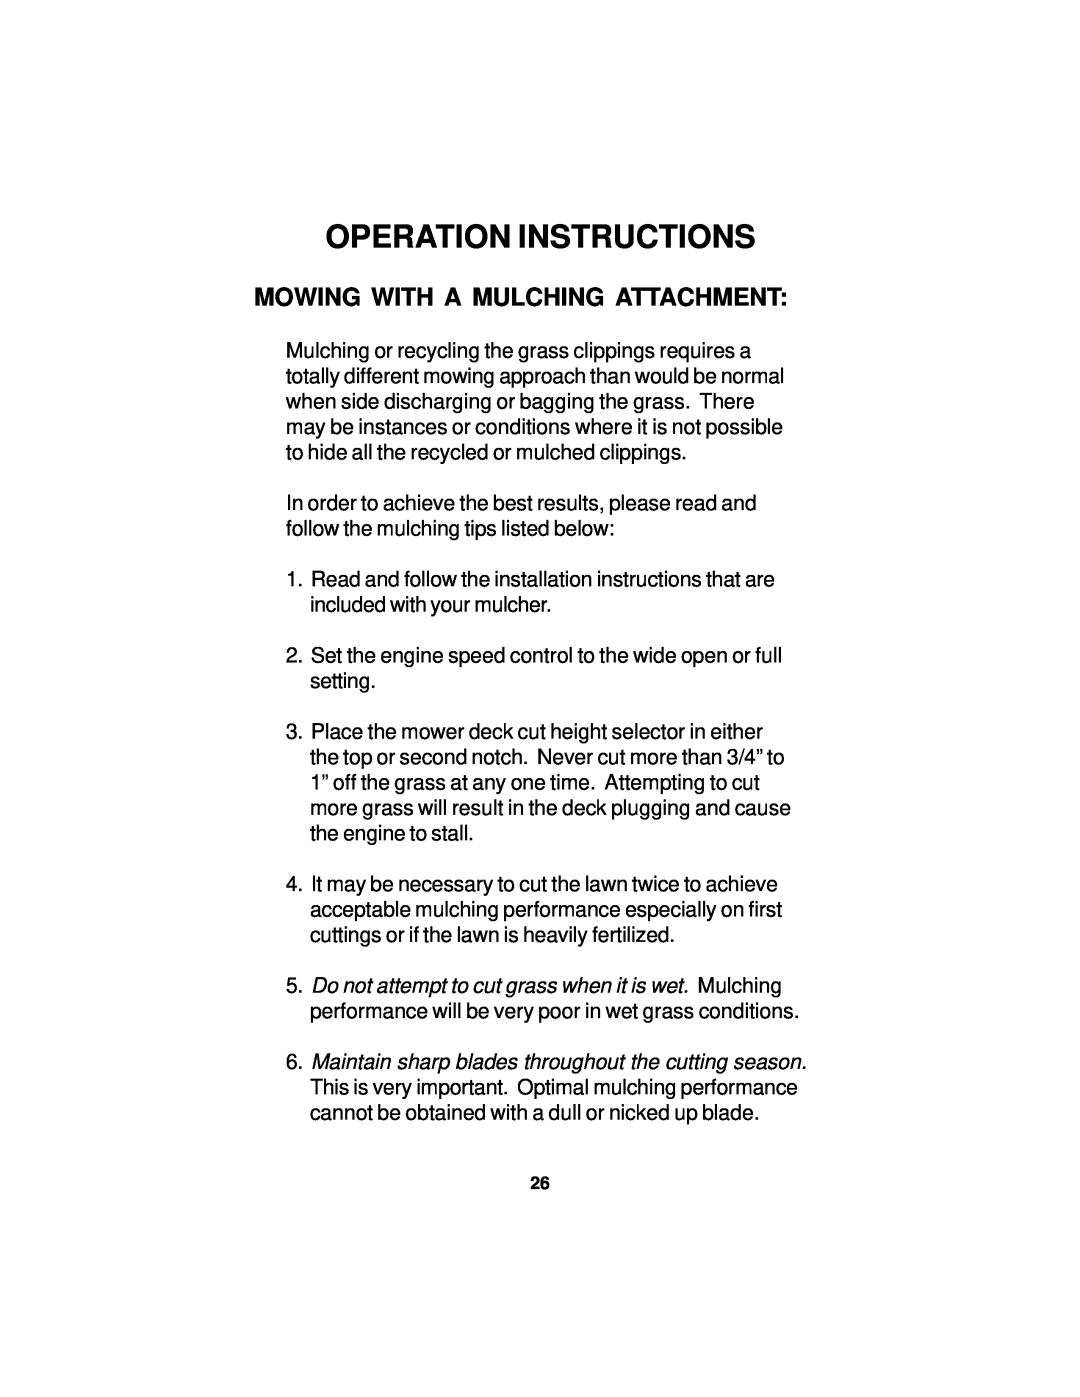 Dixon 18124-0804 manual Mowing With A Mulching Attachment, Operation Instructions 